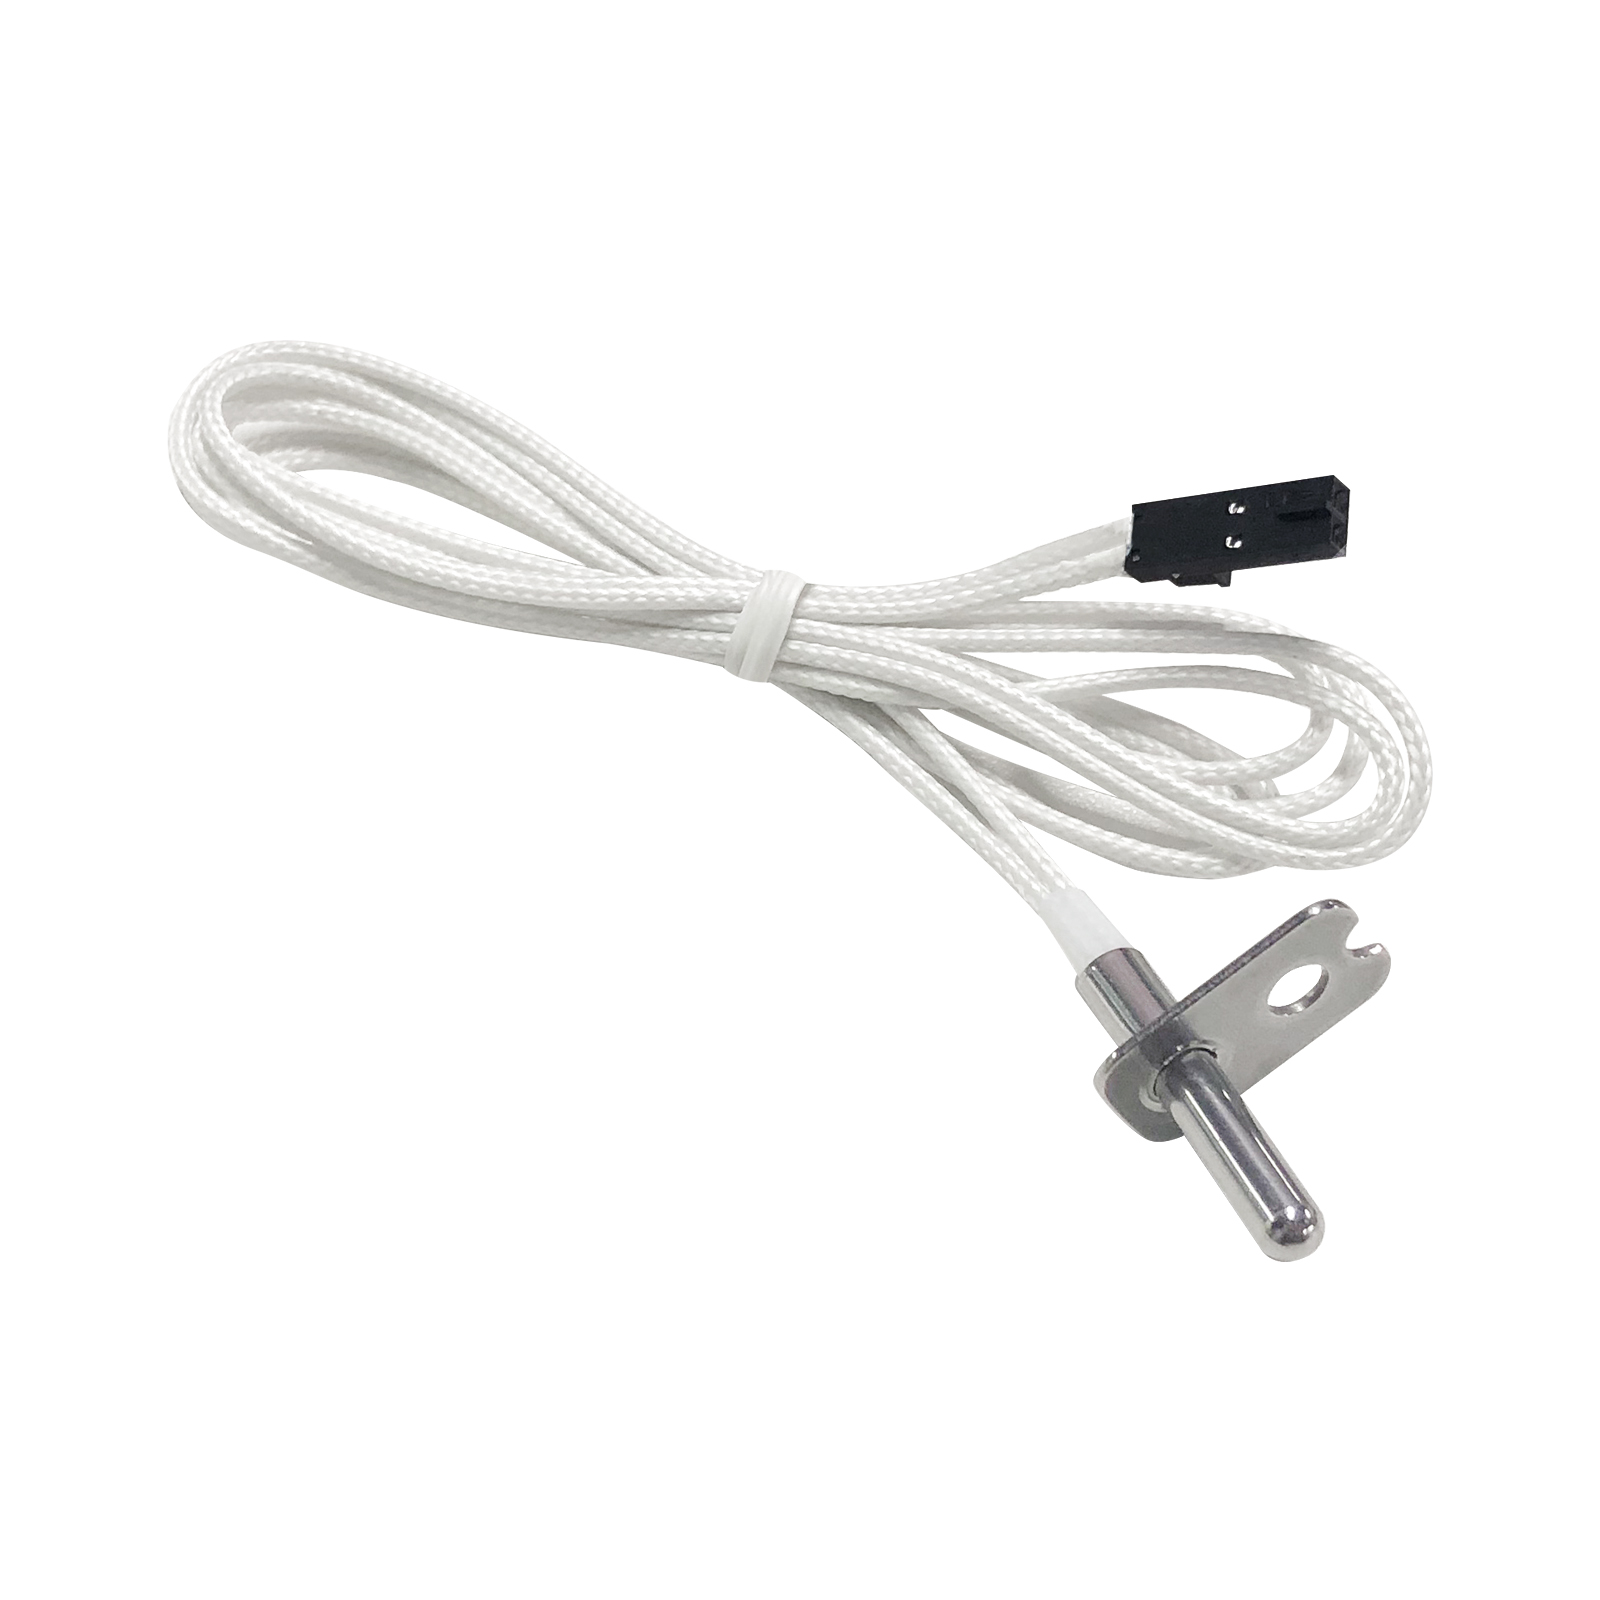 9907180092 Temperature Probe Kit for Masterbuilt Electric Smokers-YAOAWE